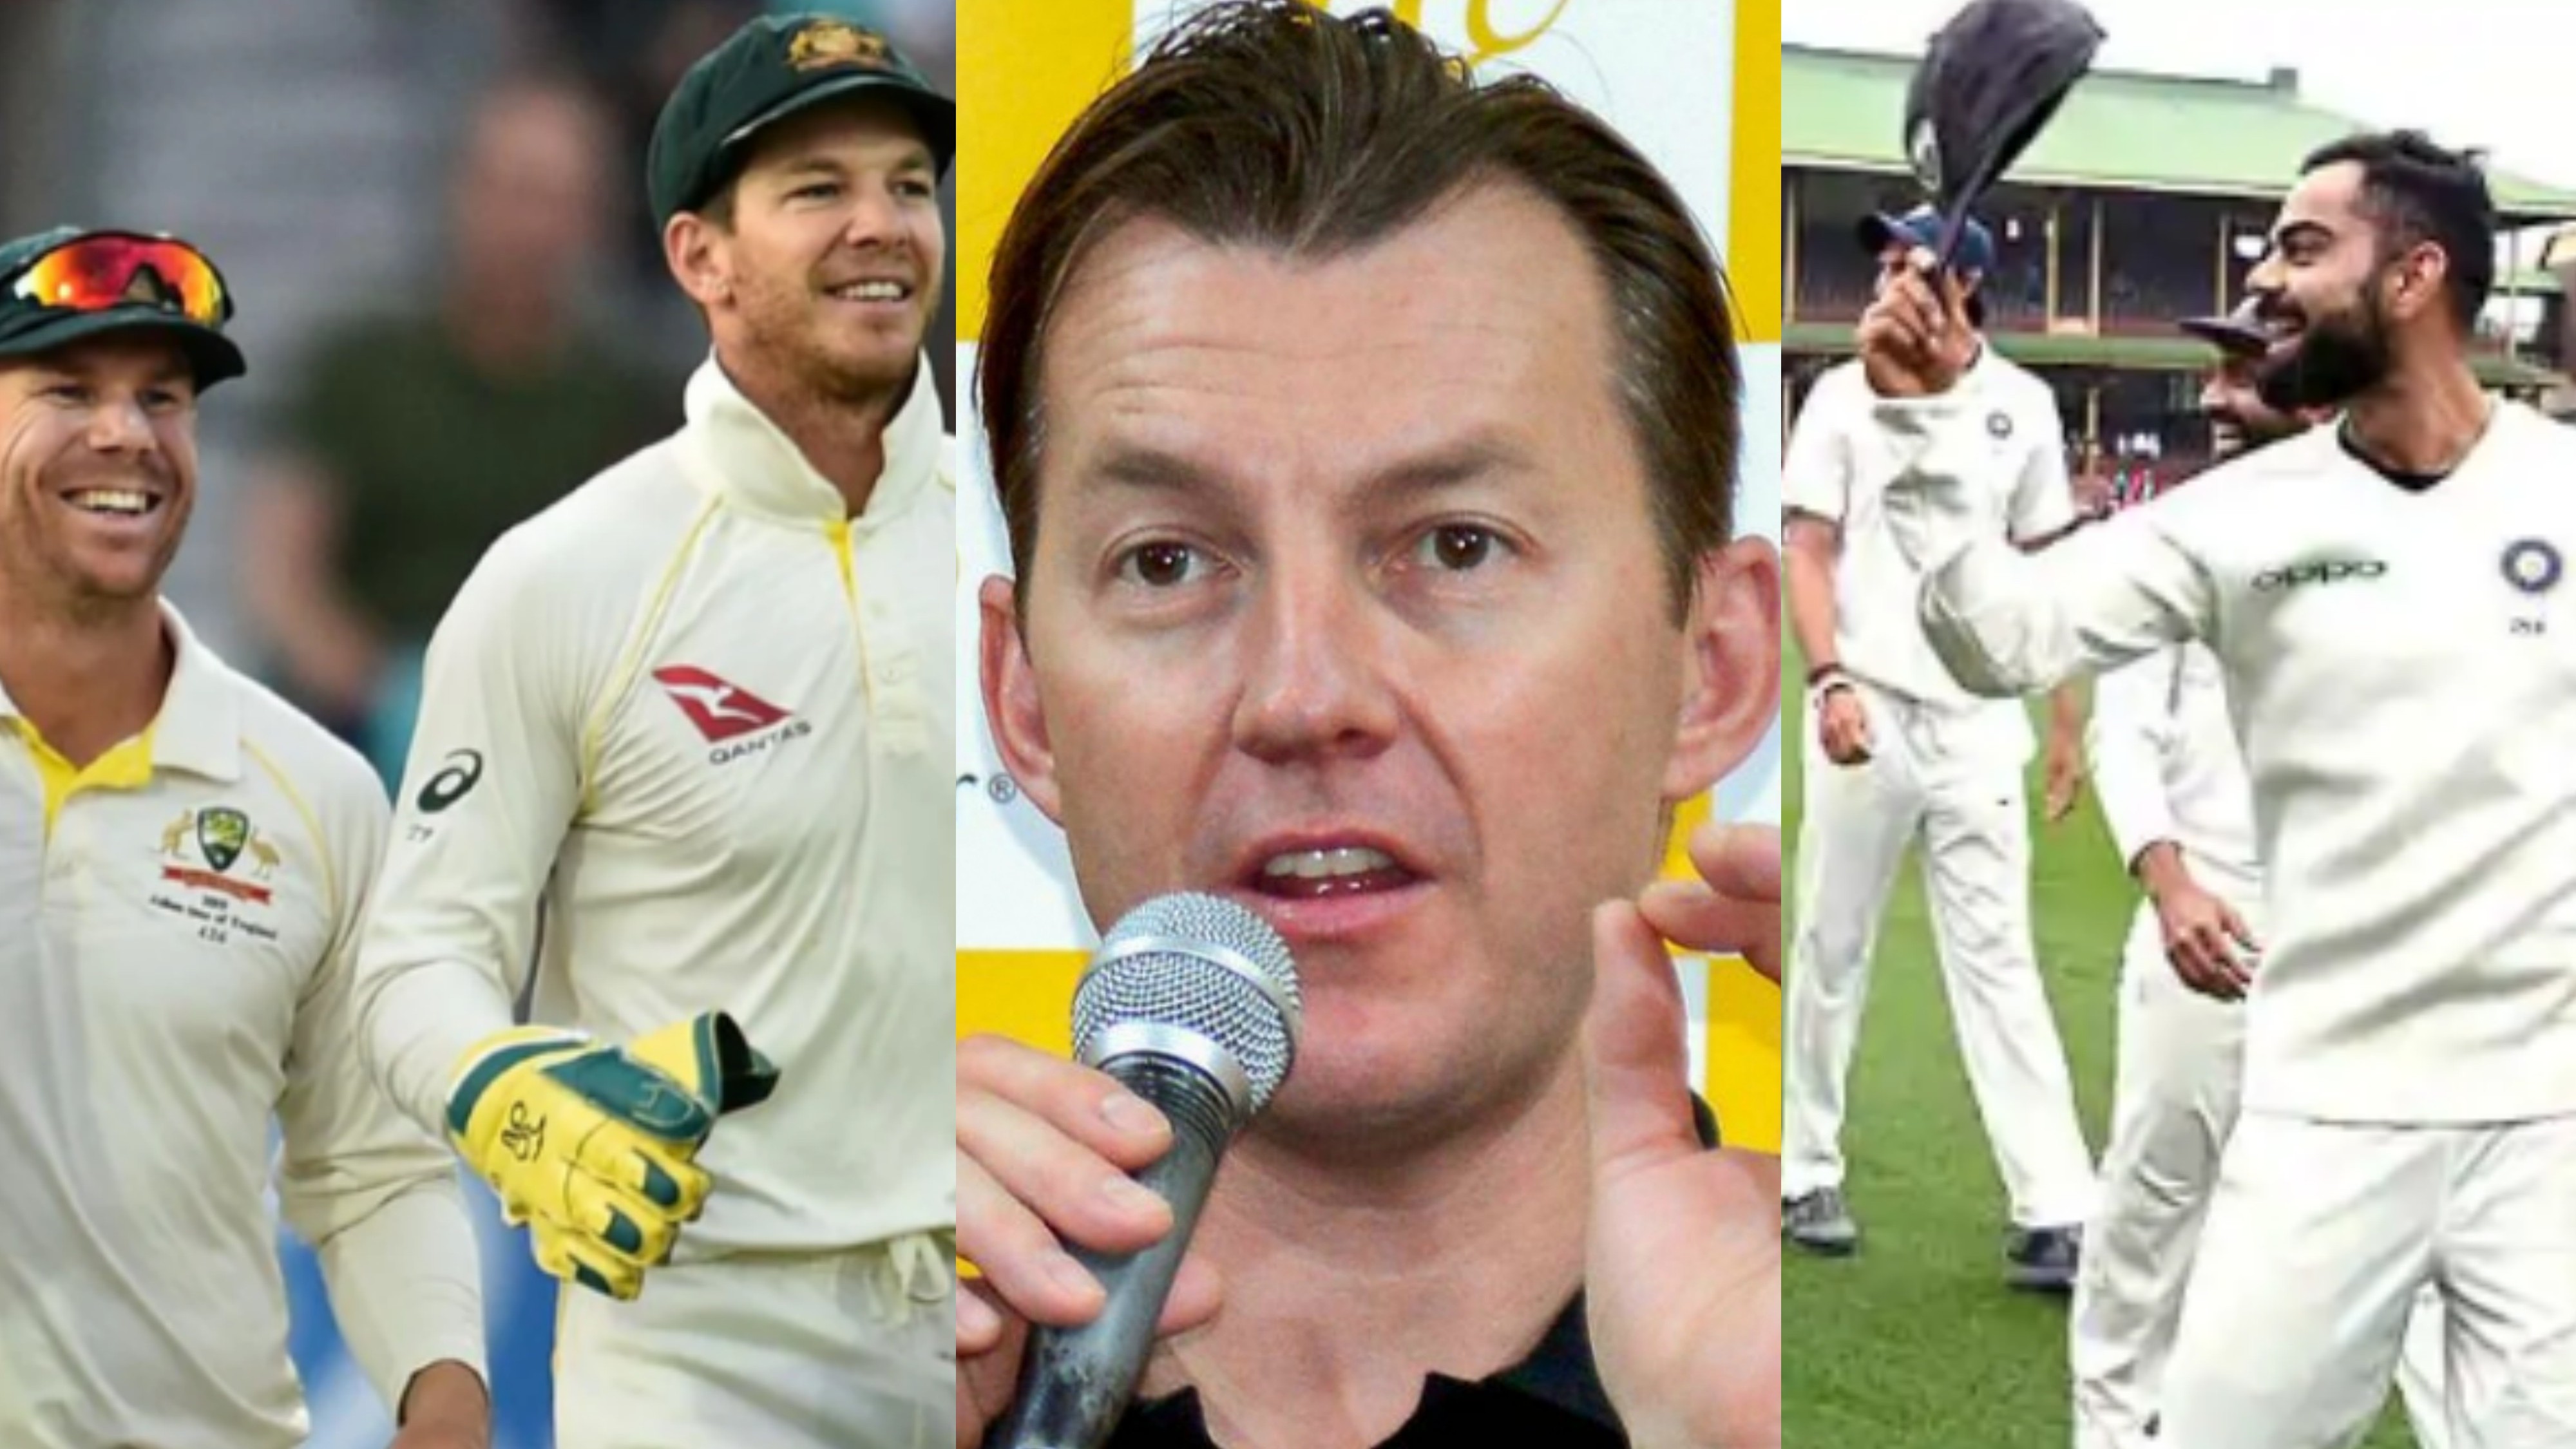 AUS v IND 2020-21: Australia will want revenge for previous Test series defeat, says Brett Lee